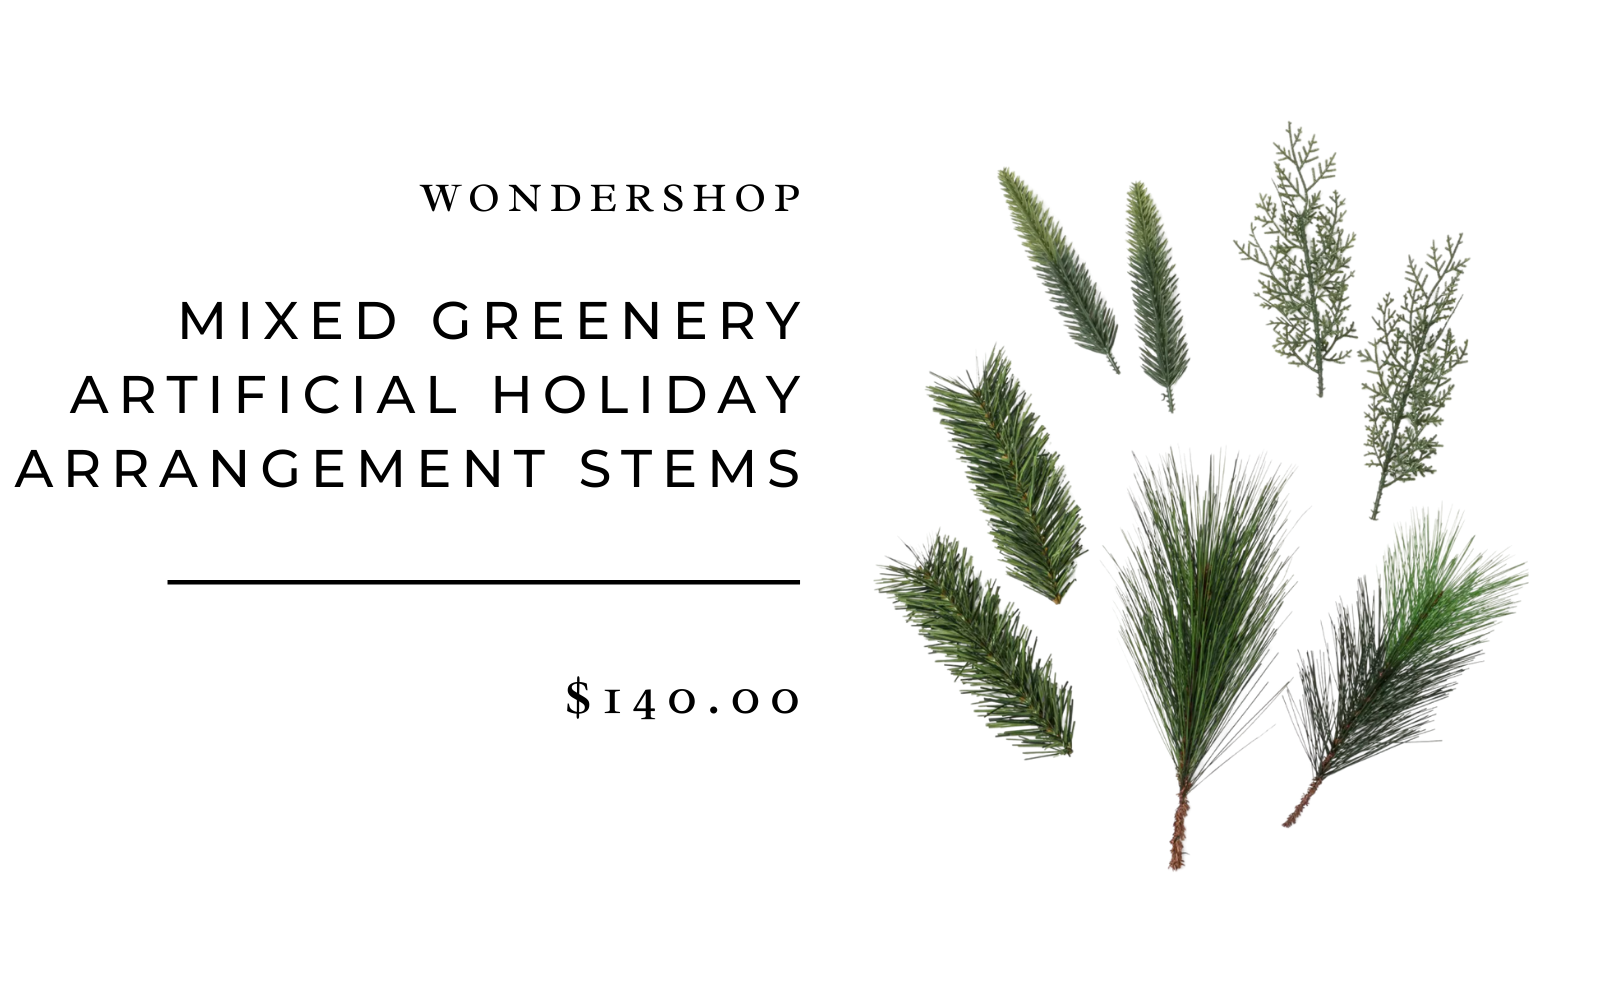 Mixed Greenery Artificial Holiday Arrangement Stems